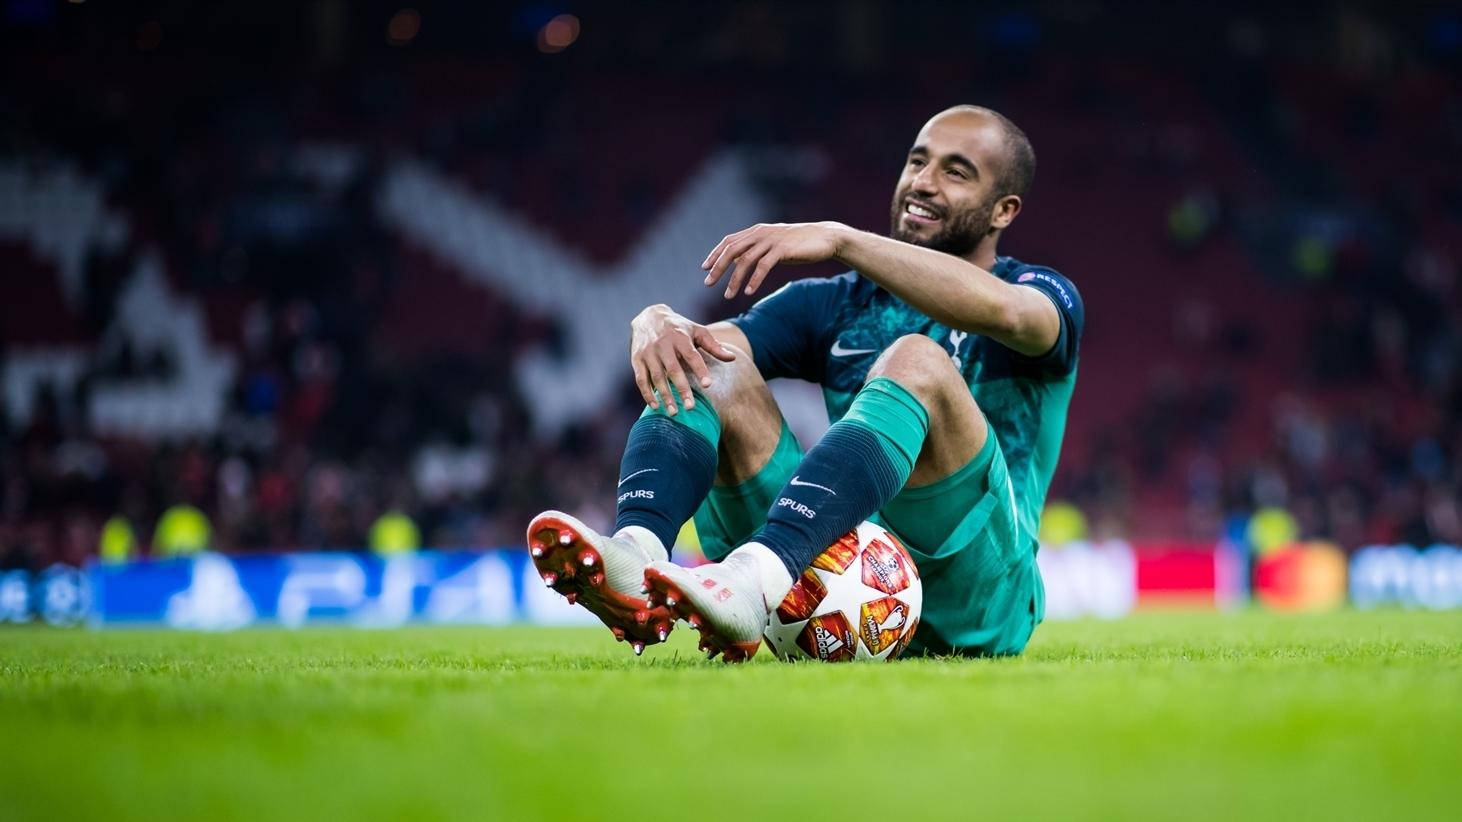 Lucasmoura Sitter På Fotbollsplanen - As A Computer Or Mobile Wallpaper, This Sentence Would Likely Accompany An Image Of Lucas Moura Sitting On A Football Field. Wallpaper